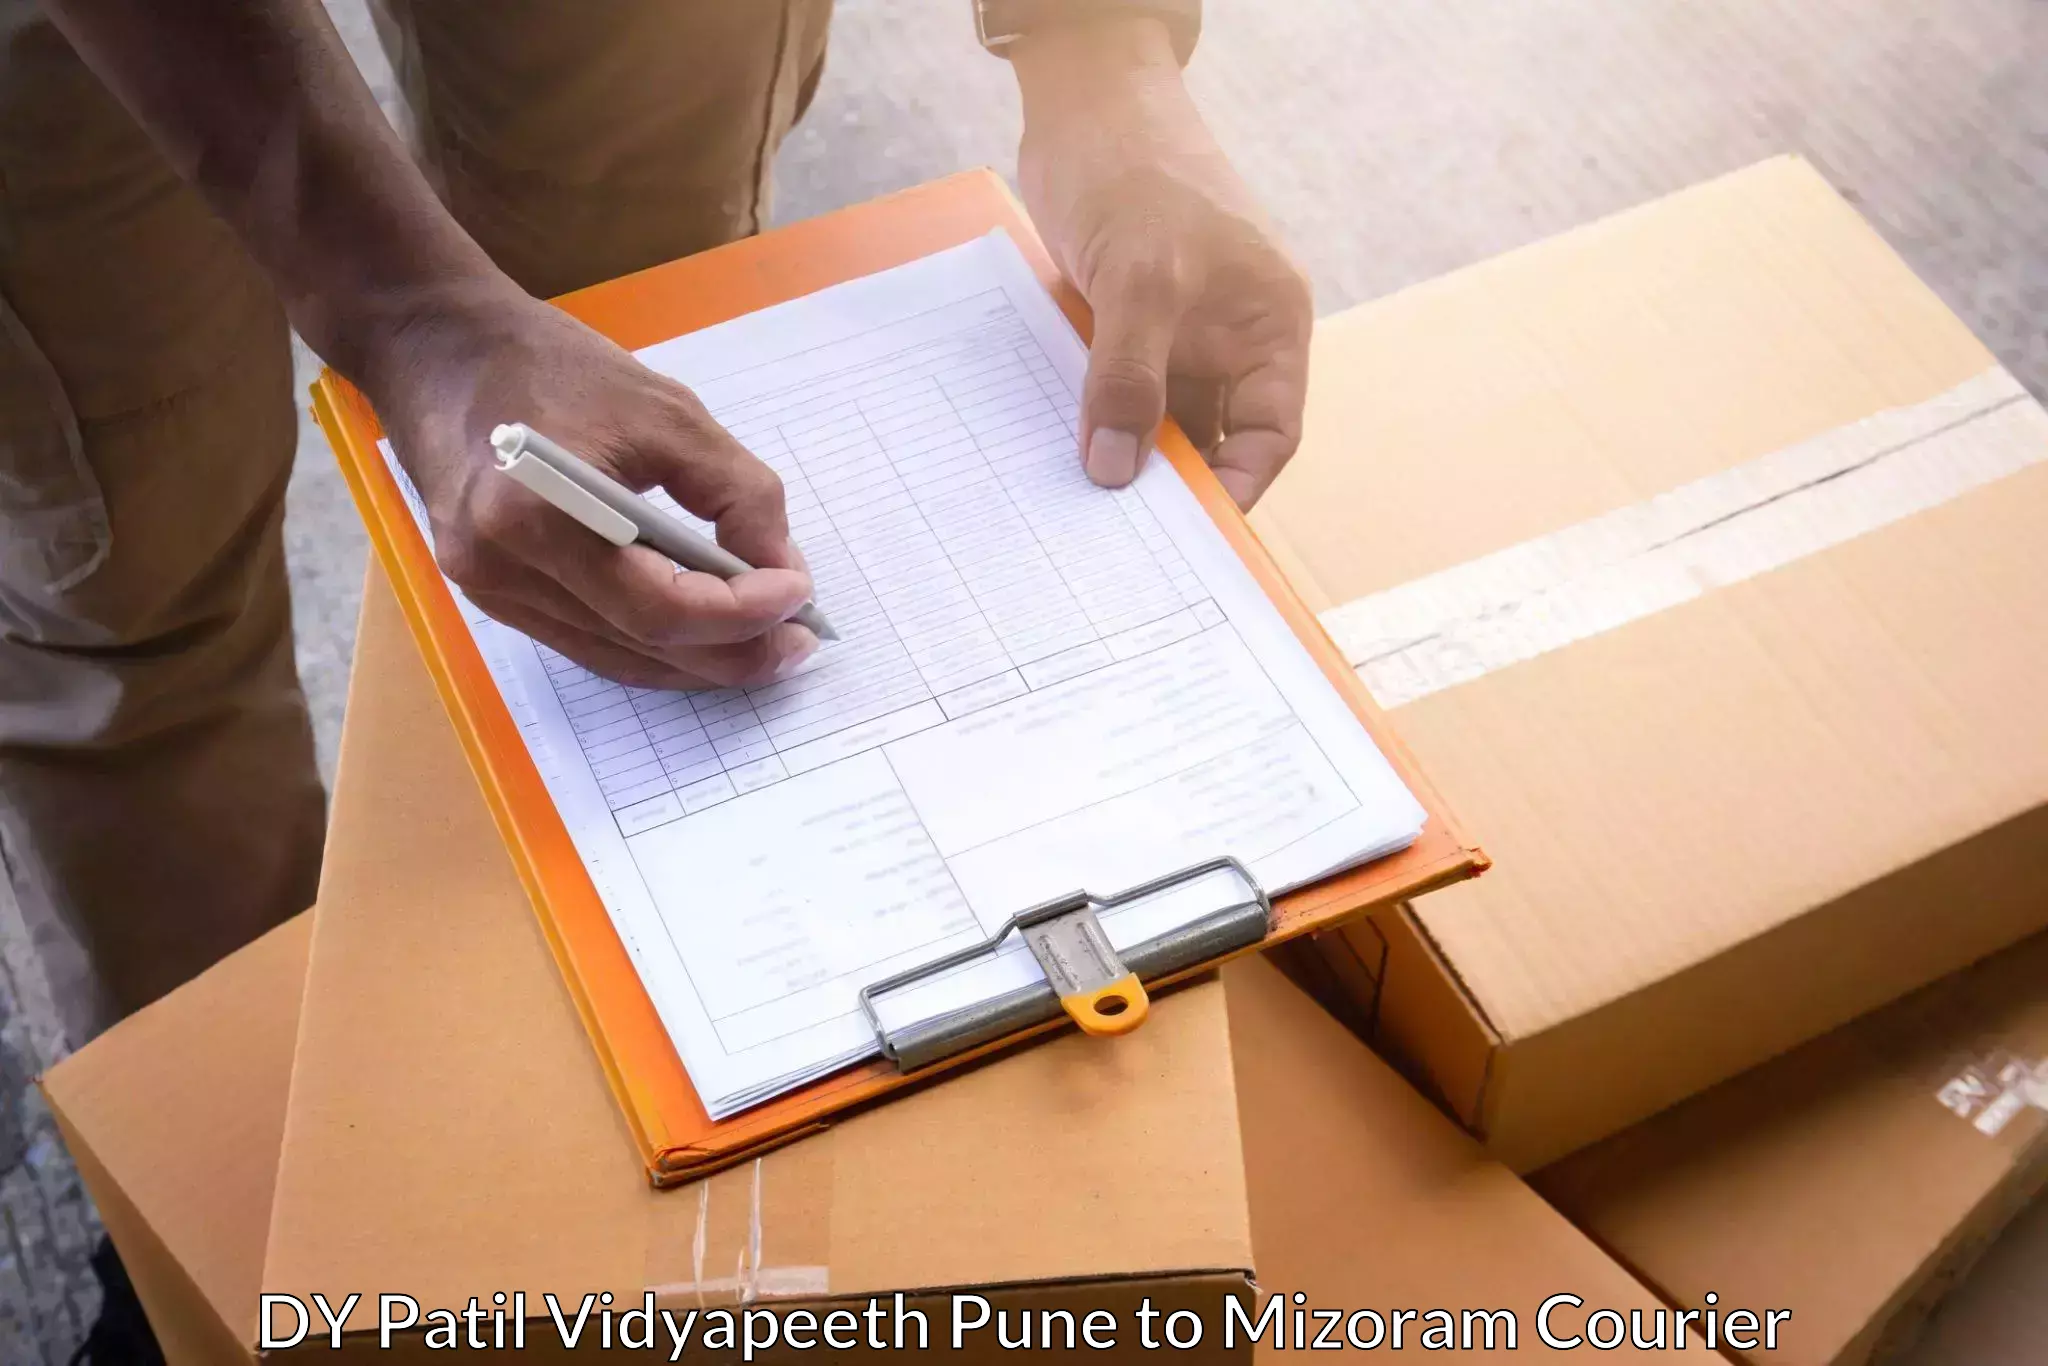 High-speed parcel service DY Patil Vidyapeeth Pune to Lawngtlai